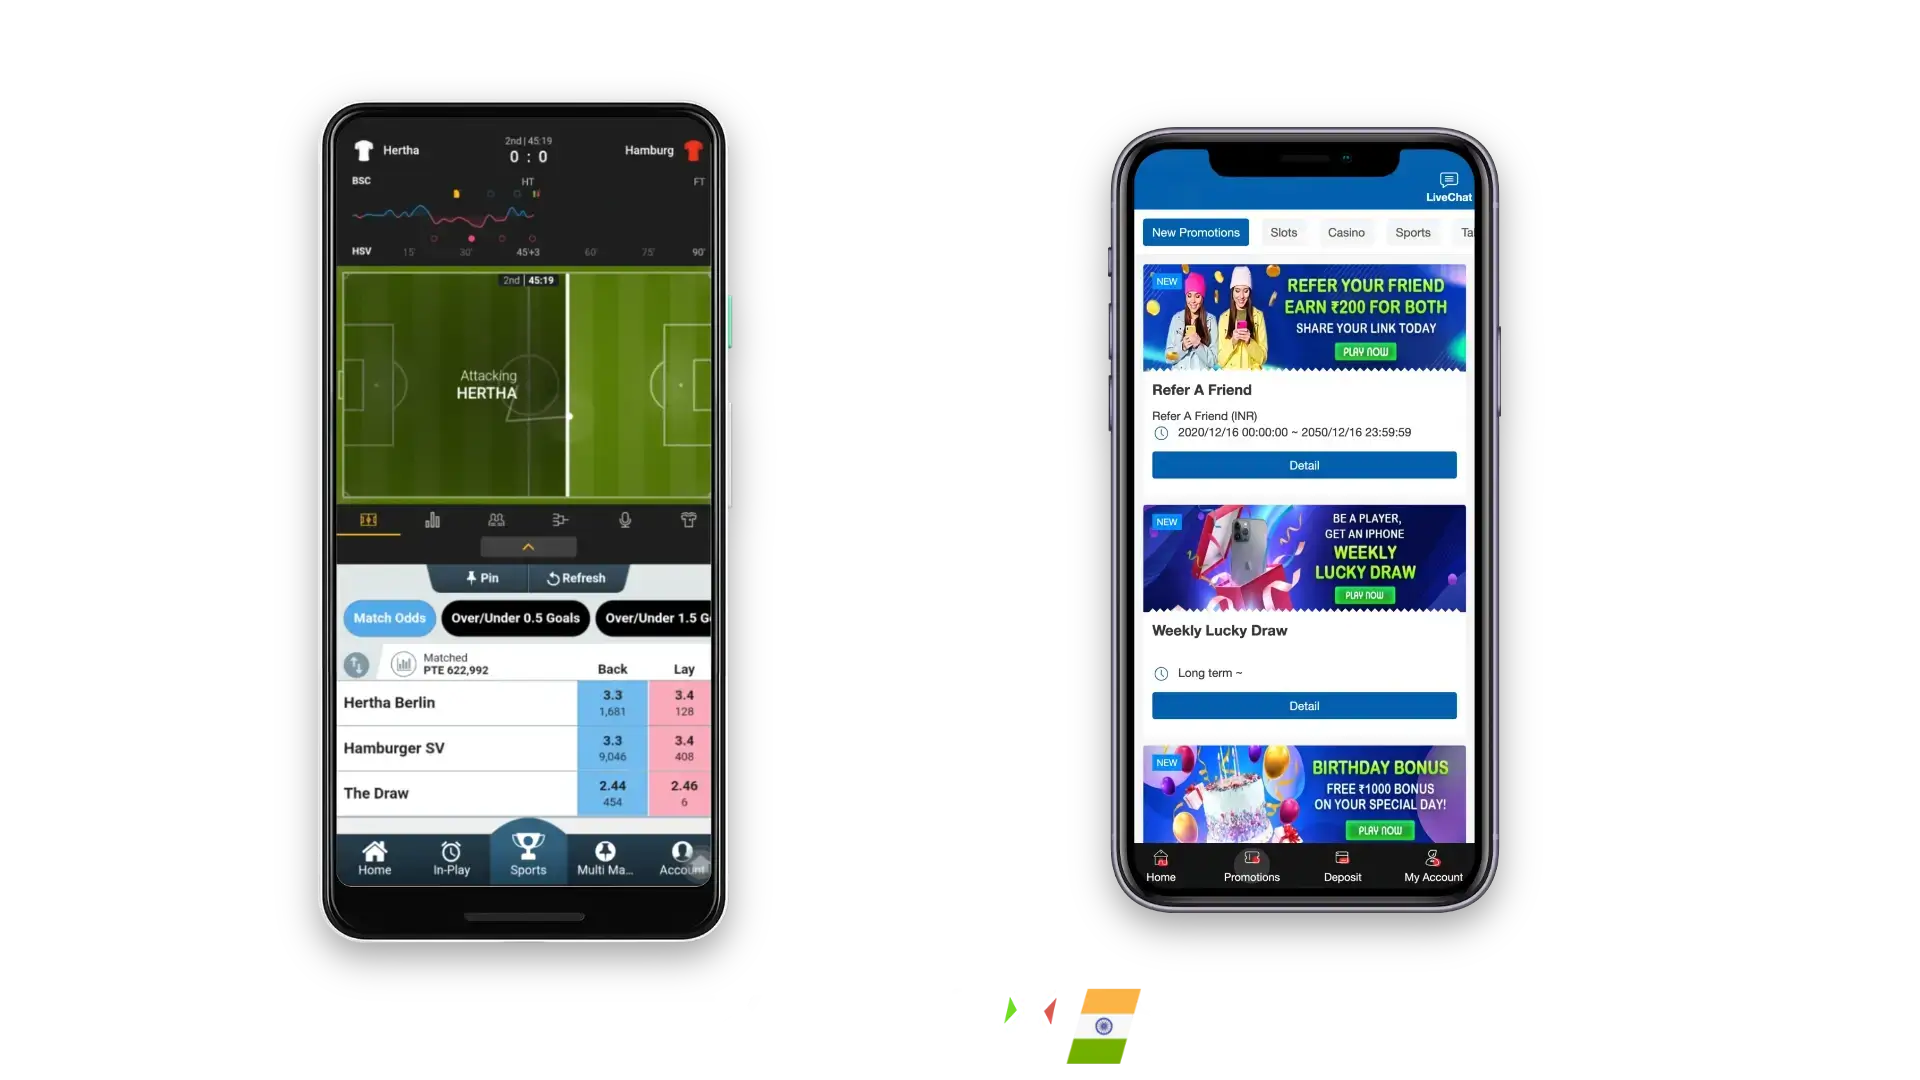 Official Crickex application for mobile users